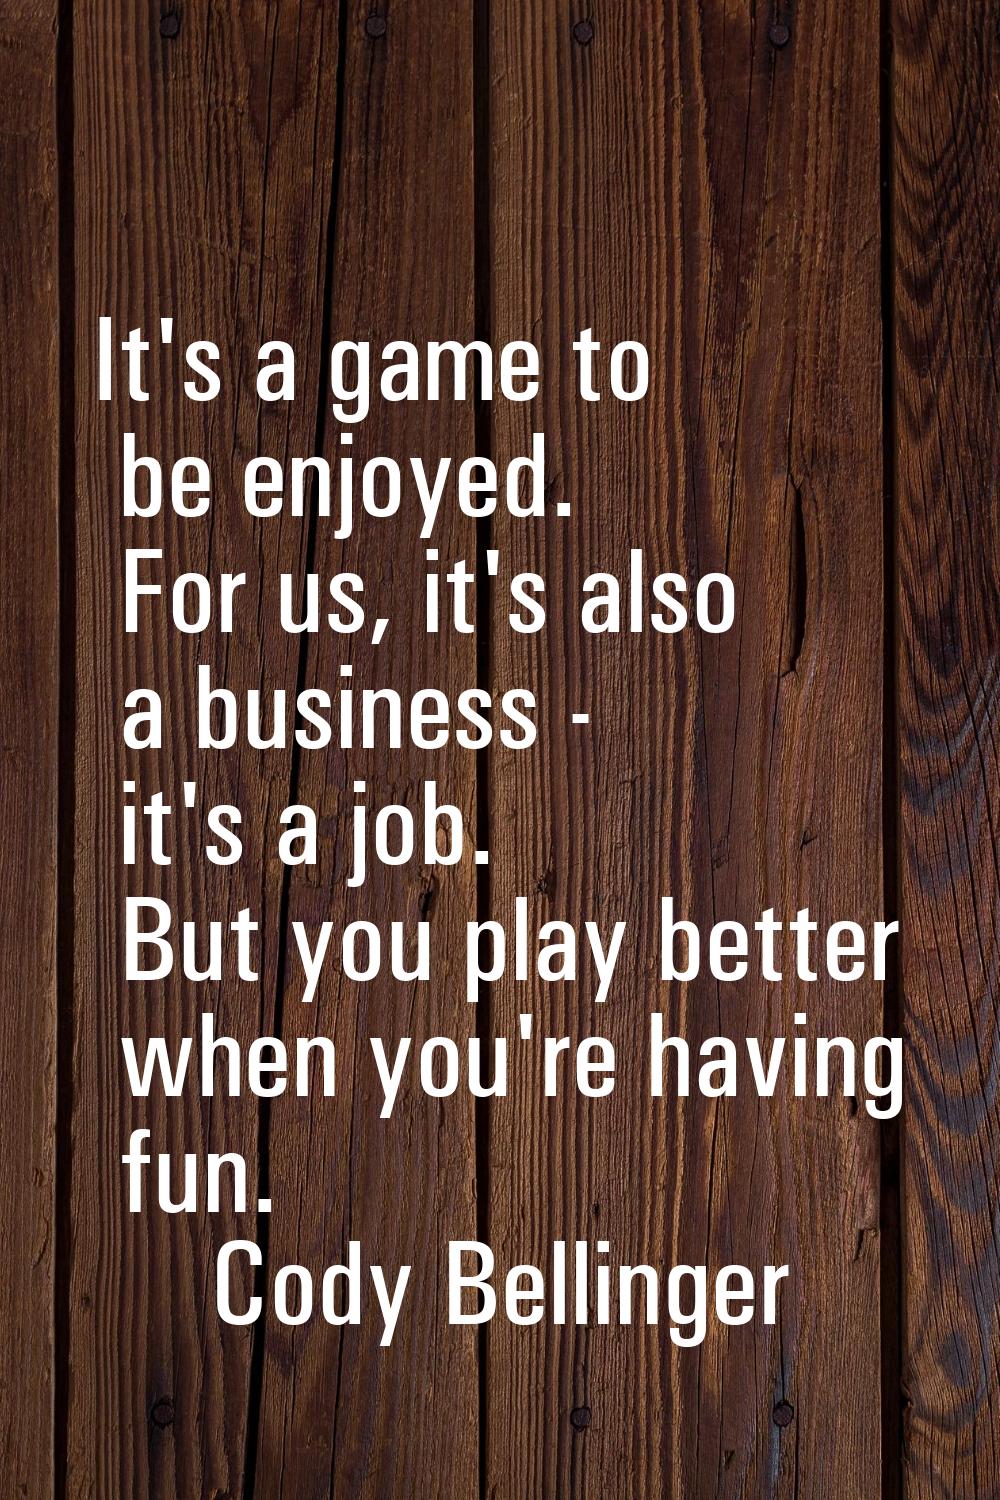 It's a game to be enjoyed. For us, it's also a business - it's a job. But you play better when you'